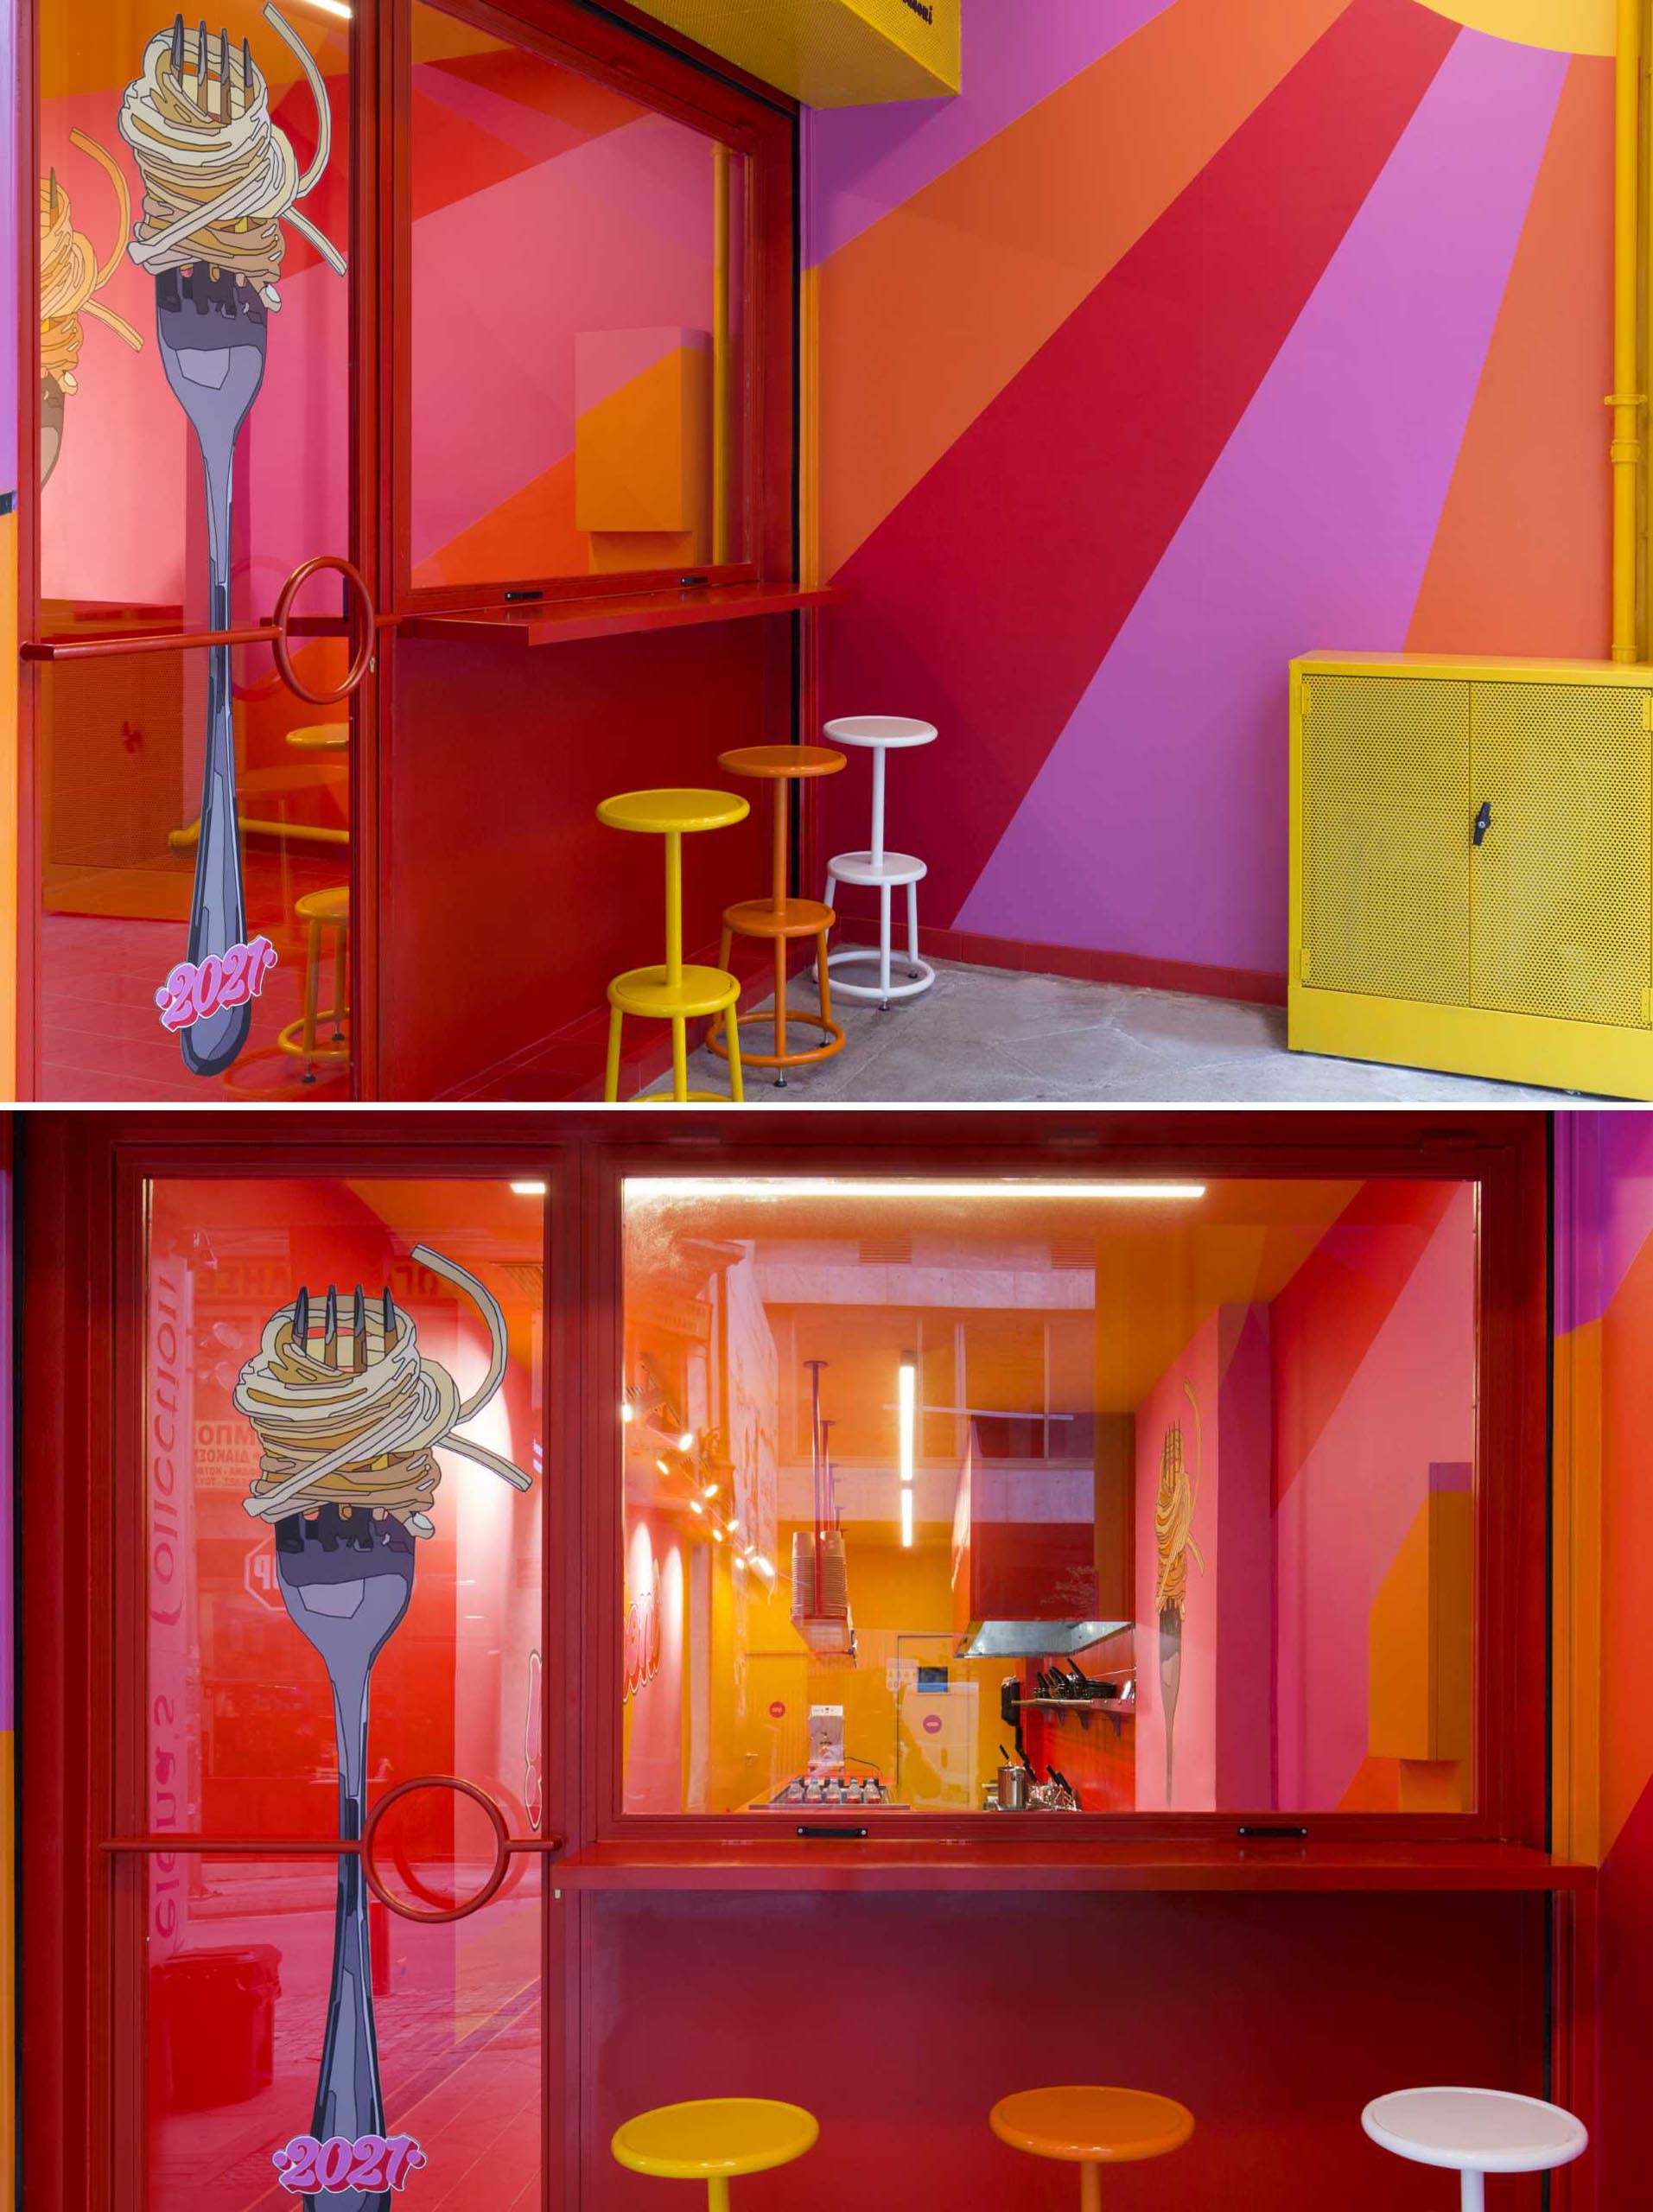 The exterior wall of this pasta shop has a striped design that flows through to the interior, while a small counter with stools provides a place to sit outside. The window can be opened to connect the interior and exterior spaces.